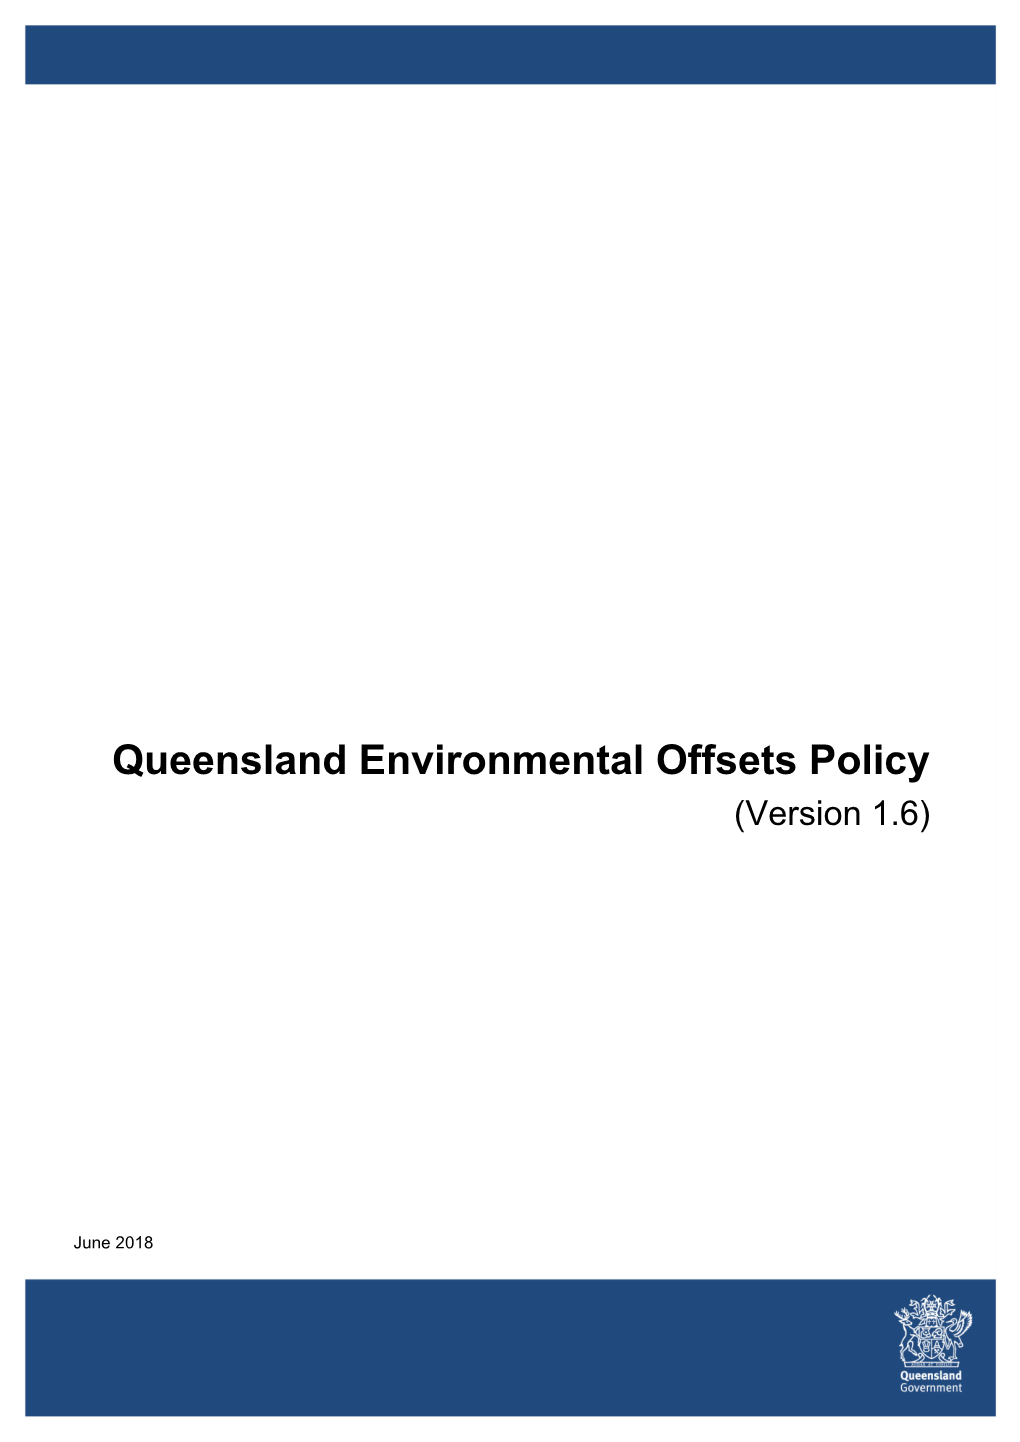 Queensland Environmental Offsets Policy (Version 1.6)